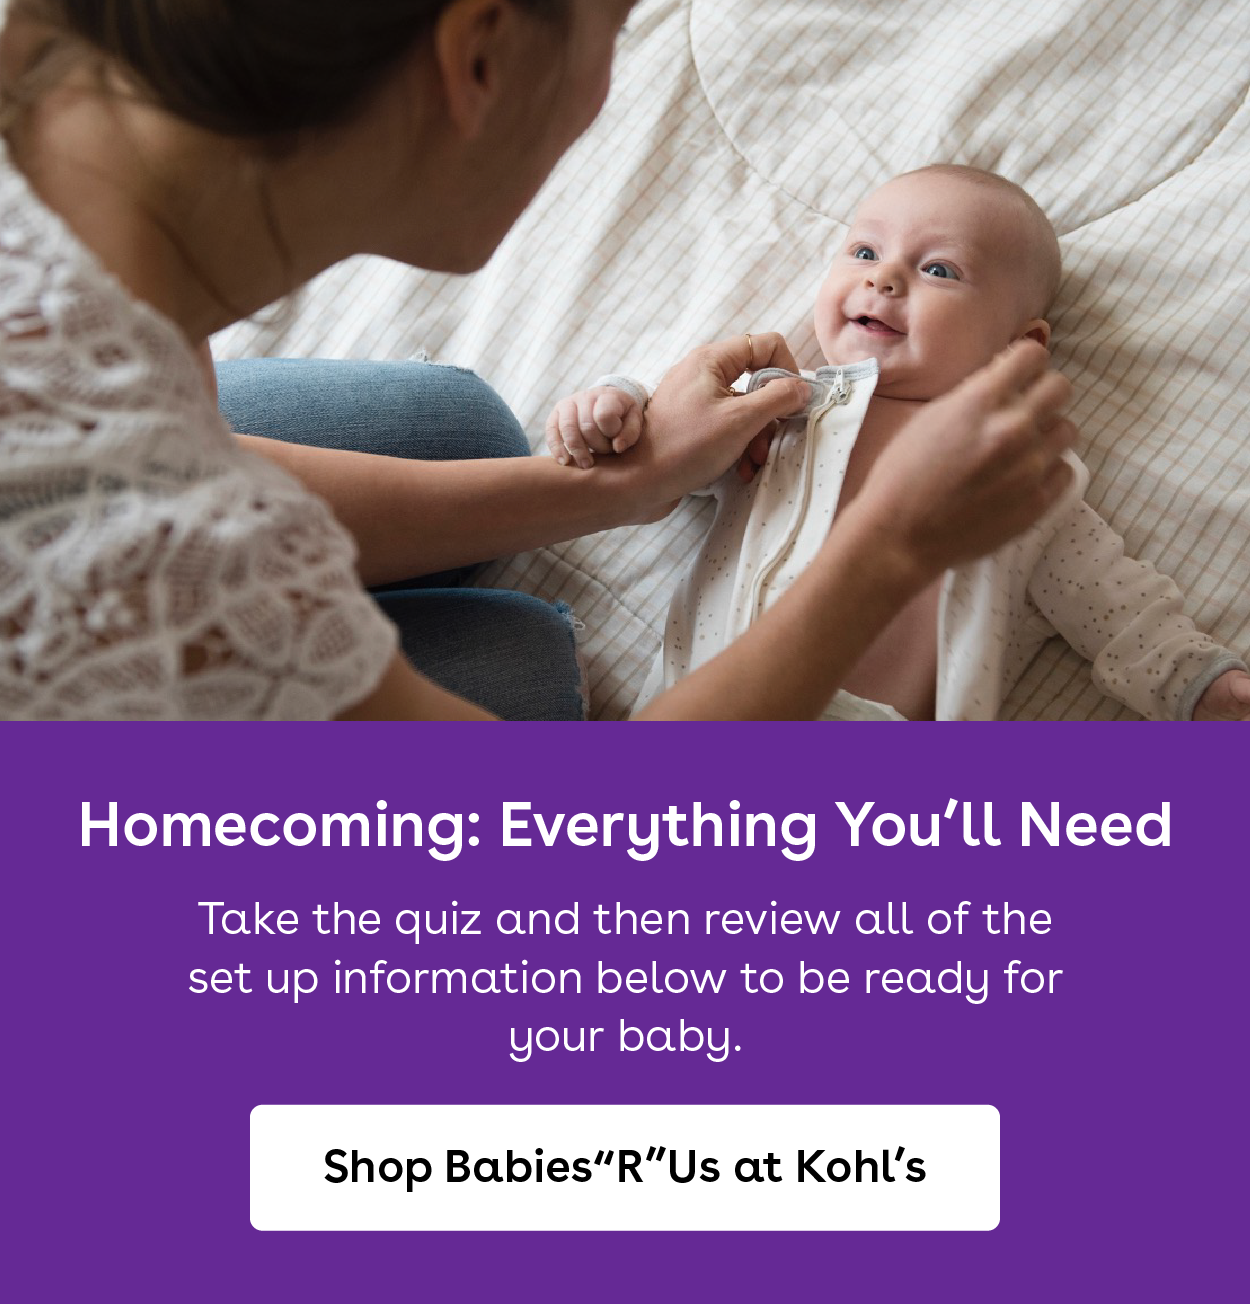 homecoming everything you will need. take the quiz and then review all of the set up information below to be ready for your baby. Shop babies r us at kohls